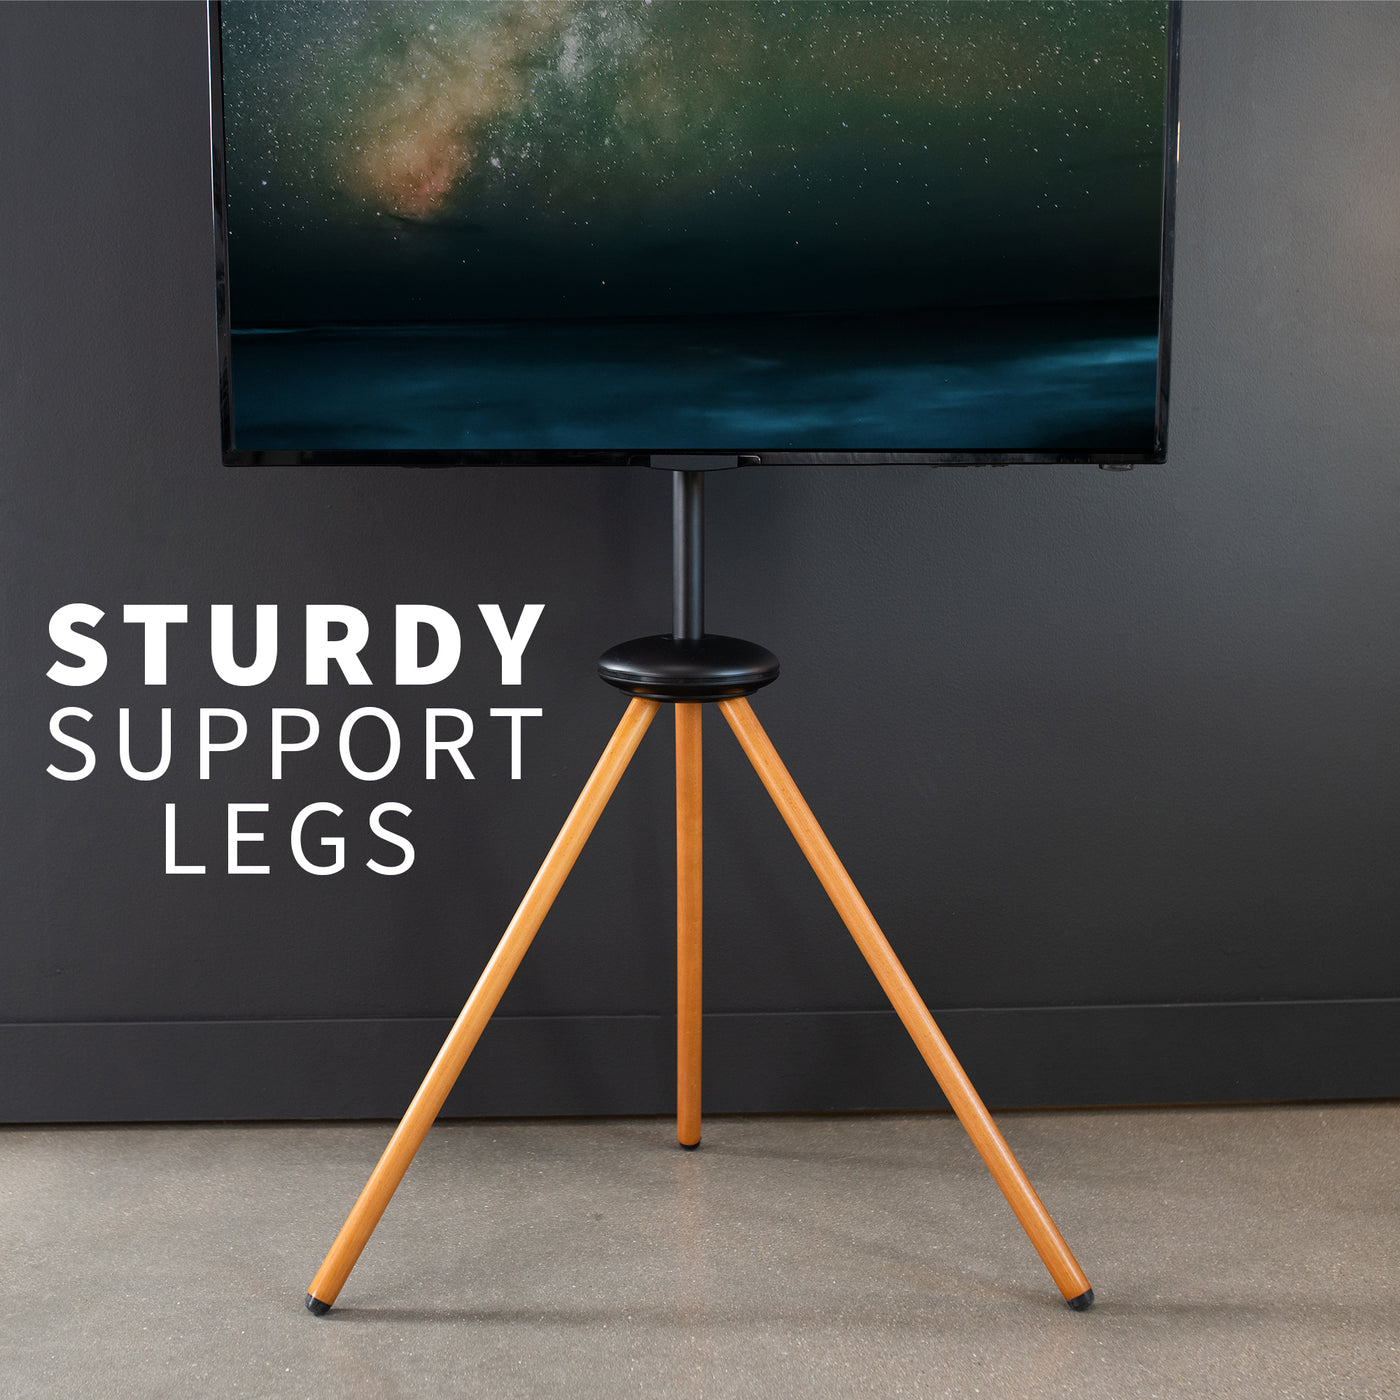 Dark walnut foldable easel studio TV stand supports 43” to 65” TV screens weighing up to 66 lbs. This collapsible tripod accommodates on-the-go presentations while also providing solid support for your screen.